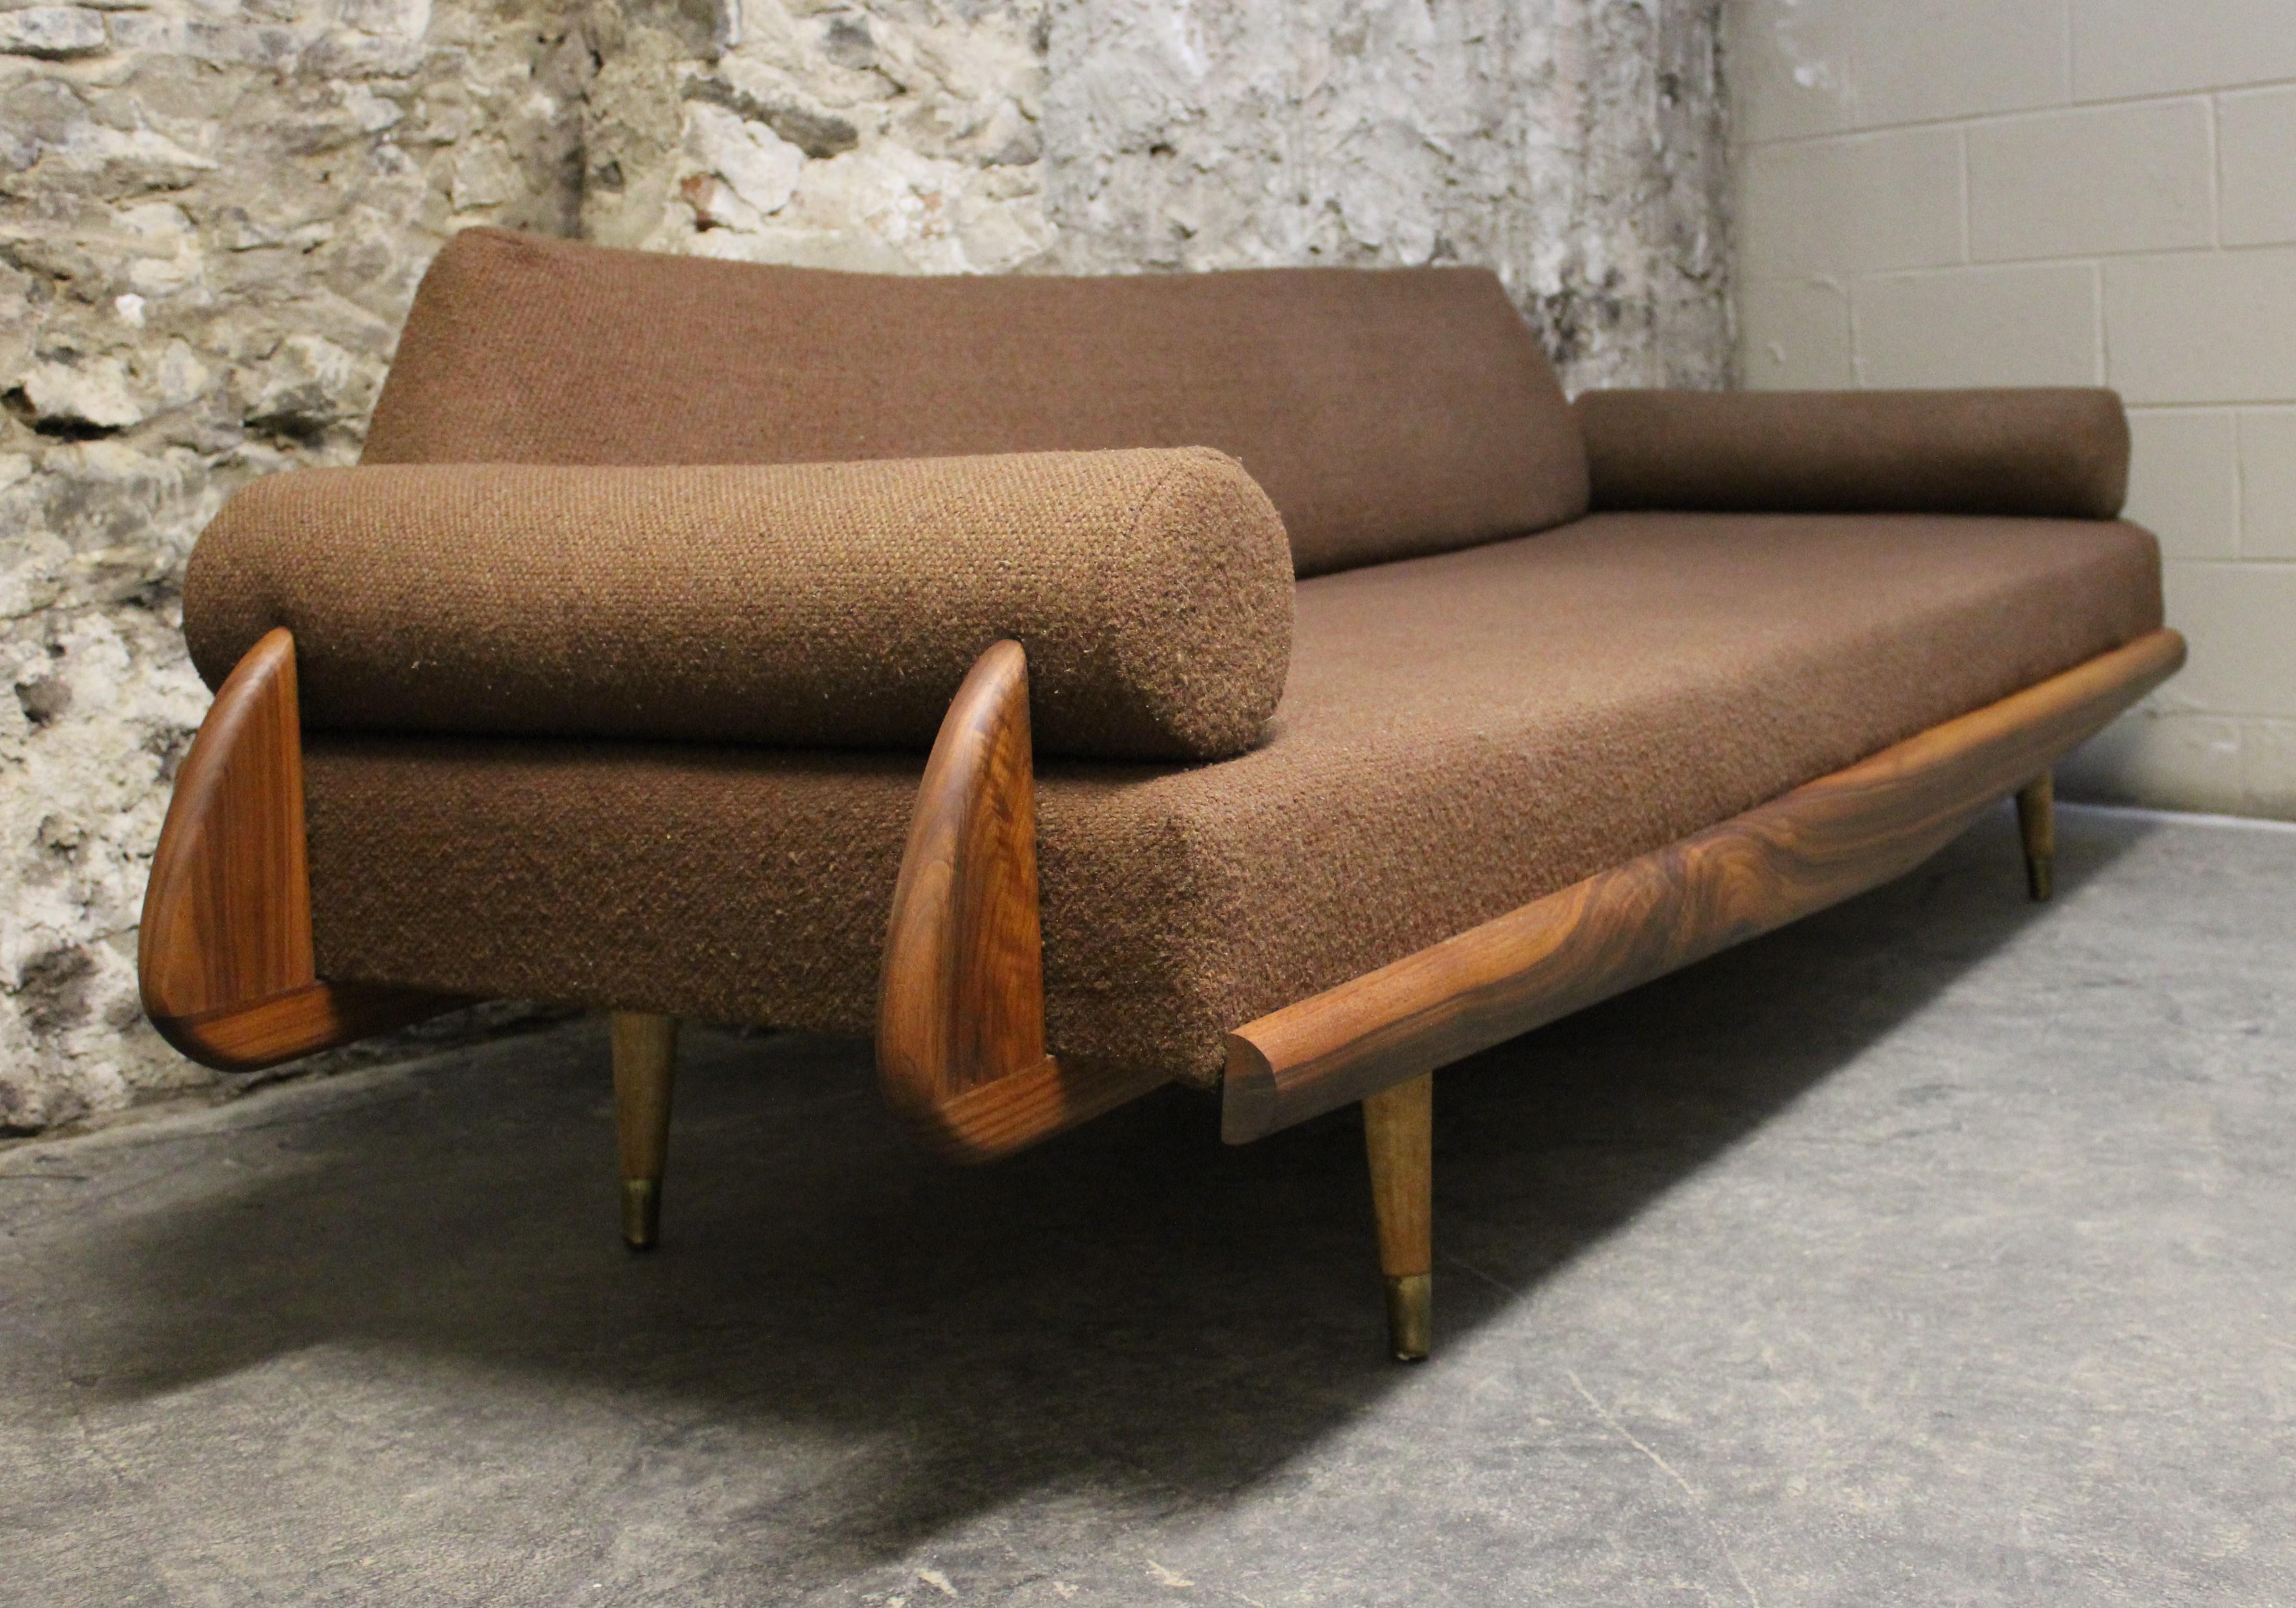 Stunning Adrian Pearsall sofa for craft associates. Walnut accents are in great condition with beautiful wood grain showing.  The upholstery is vintage and probably original.  Shows very little wear with no damage.  